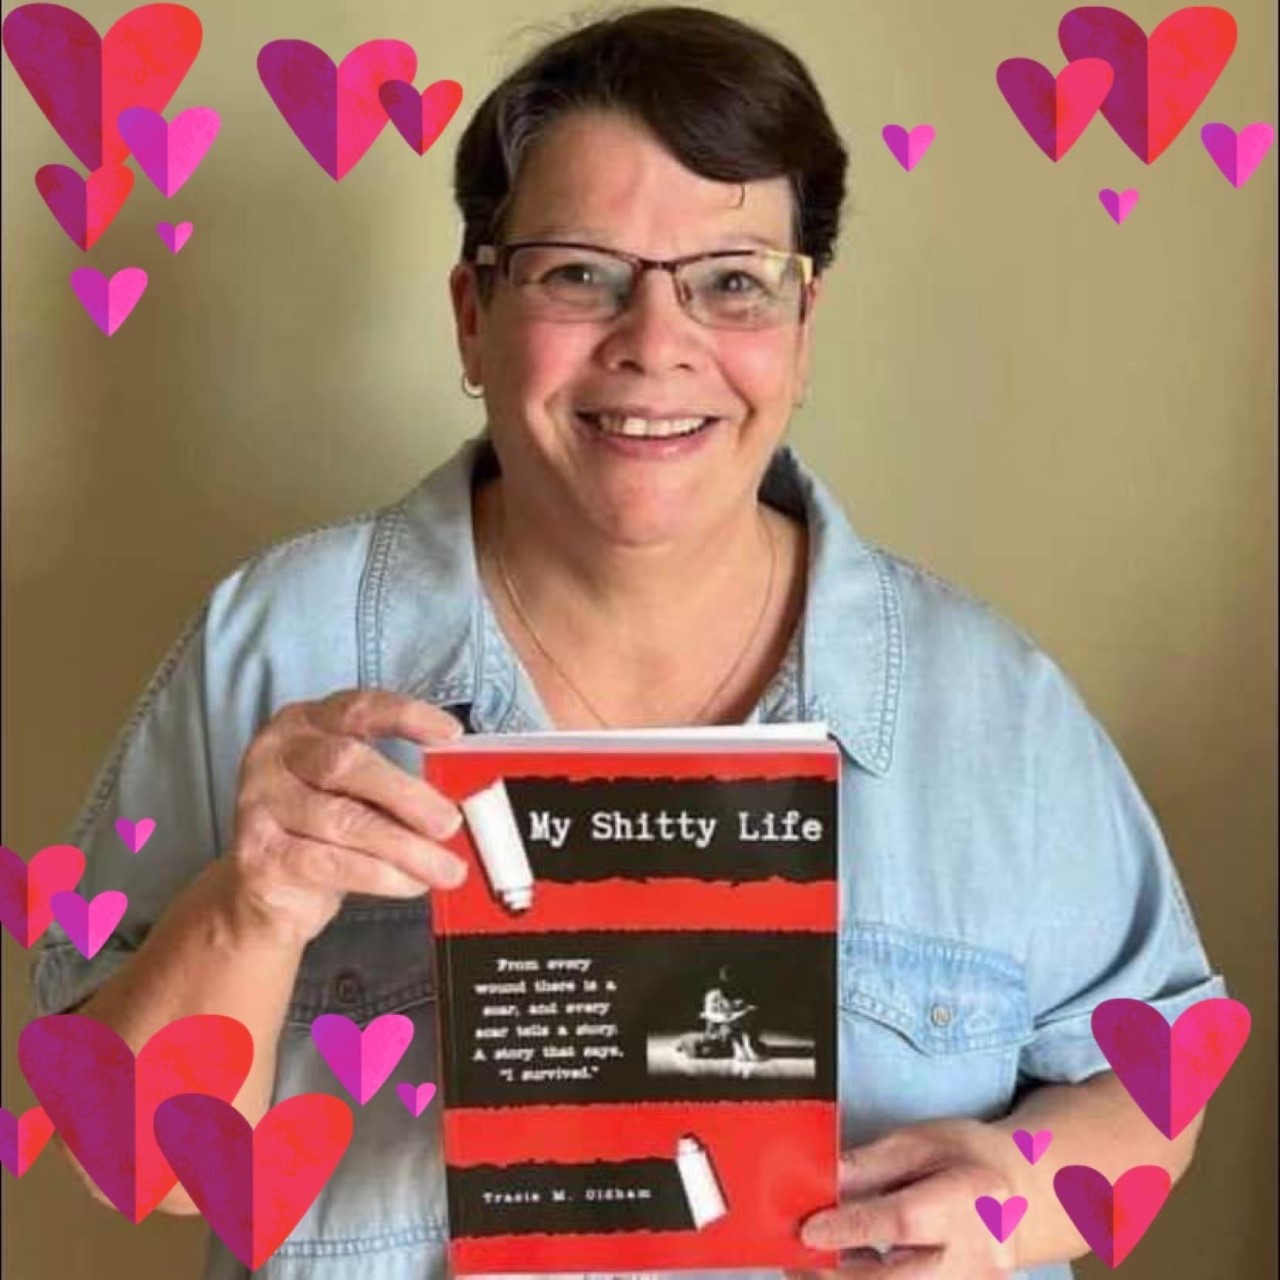 Hearts photoshopped around a smiling woman with brown short hair wearing glasses and holding up a book titled 